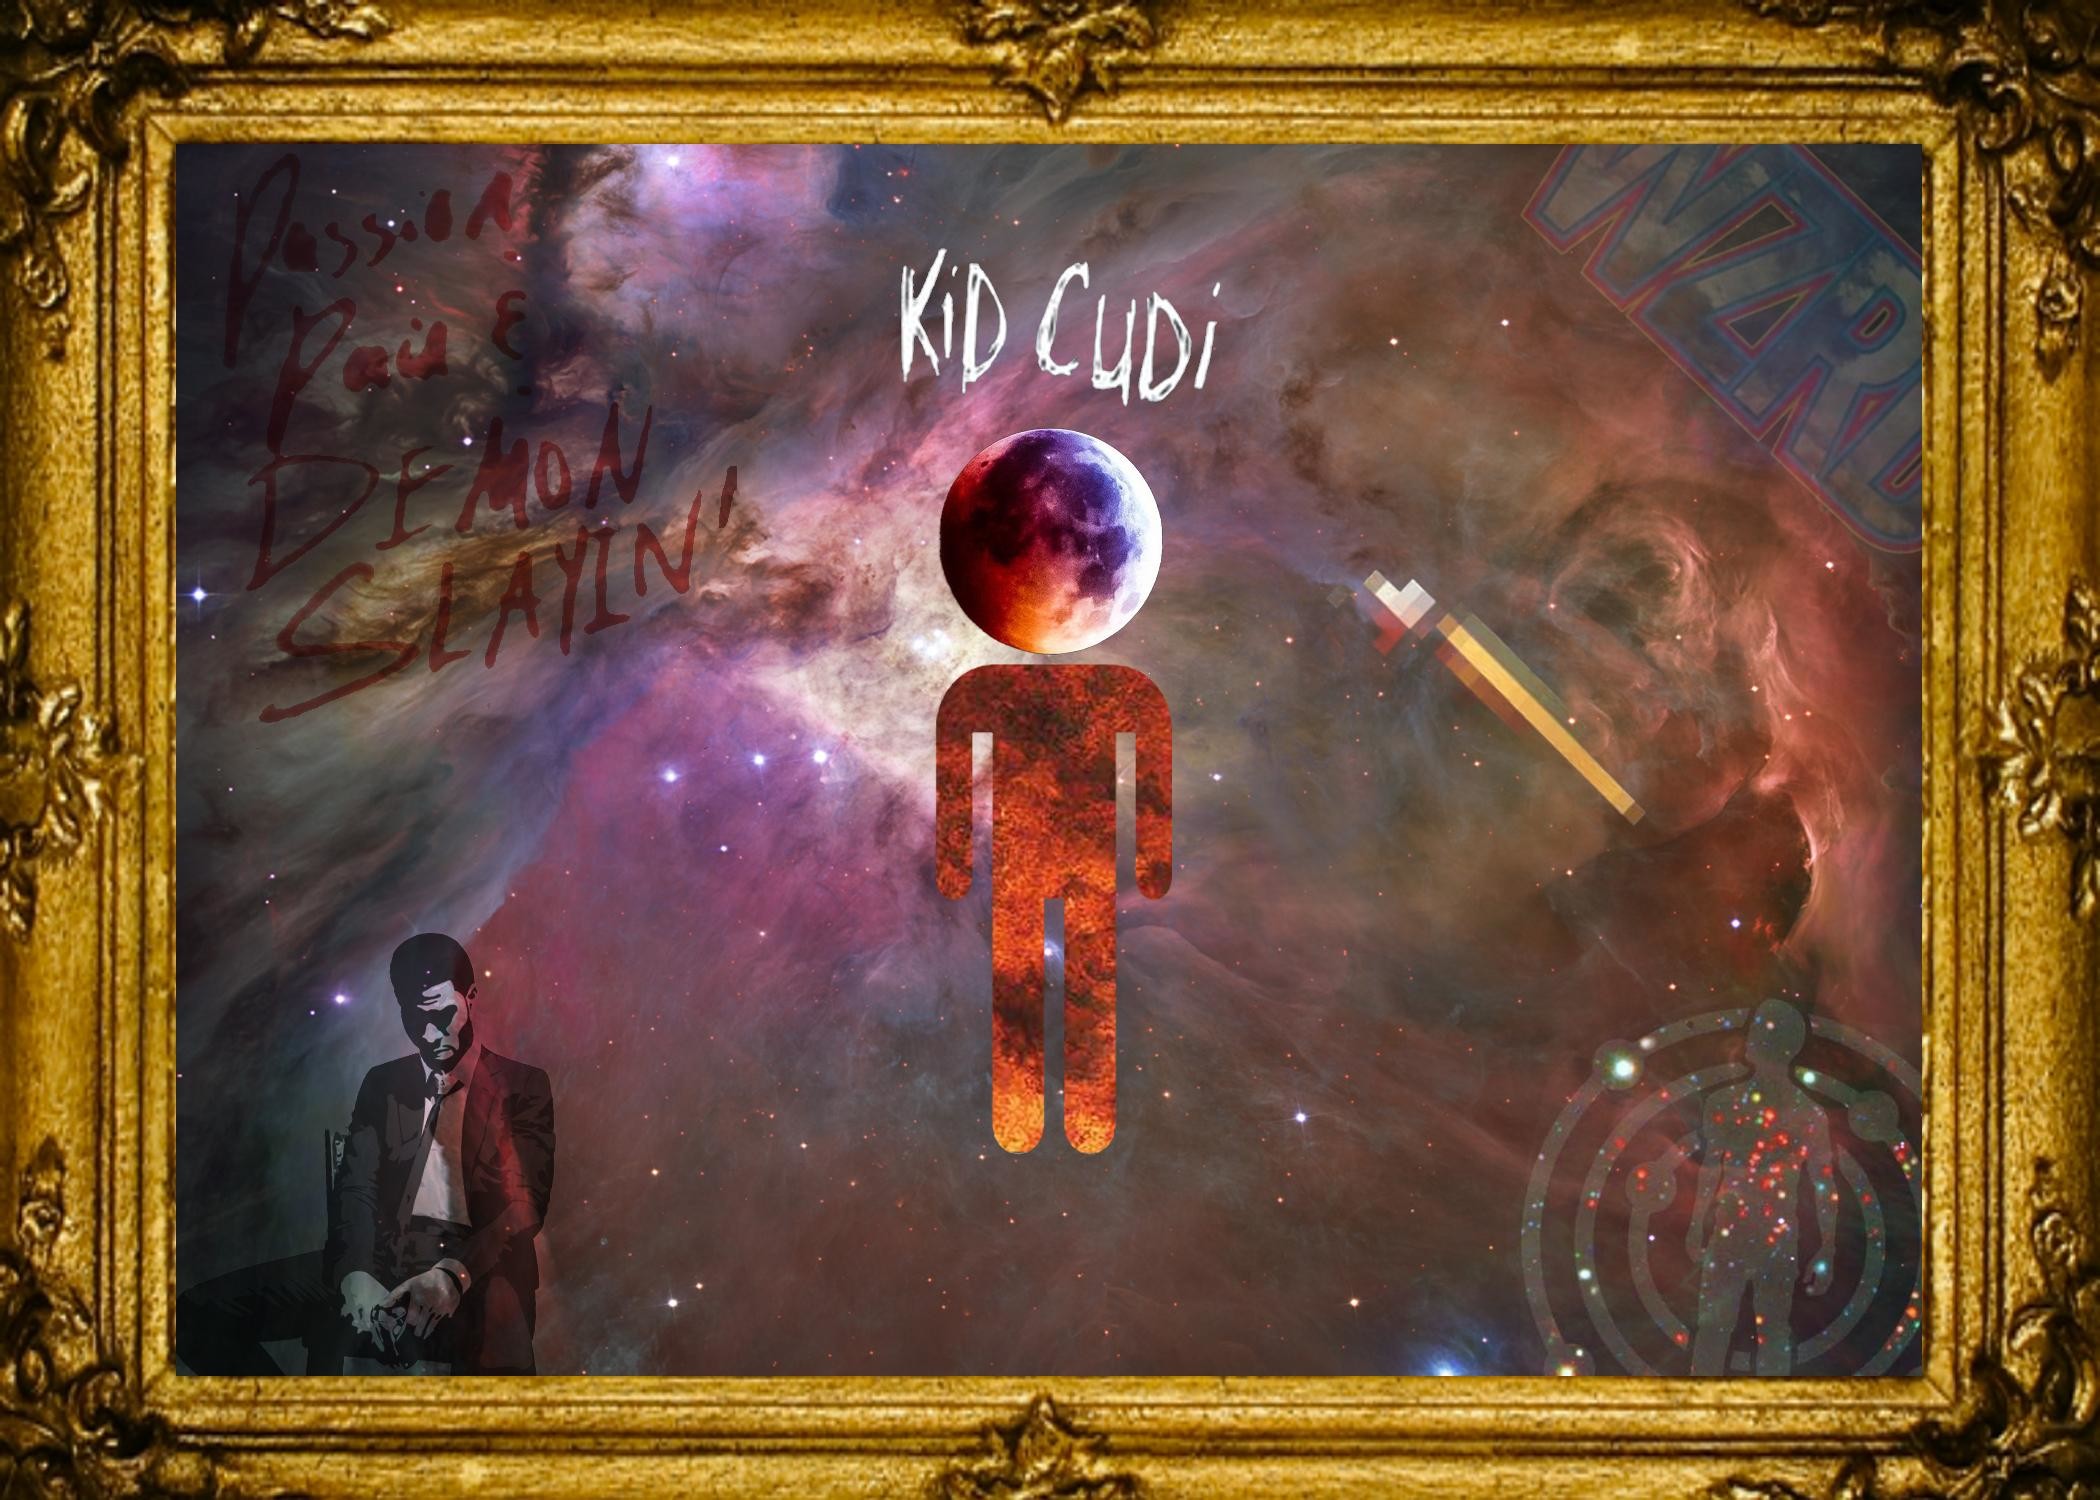 kid cudi iphone wallpaper,art,painting,picture frame,mythology,space